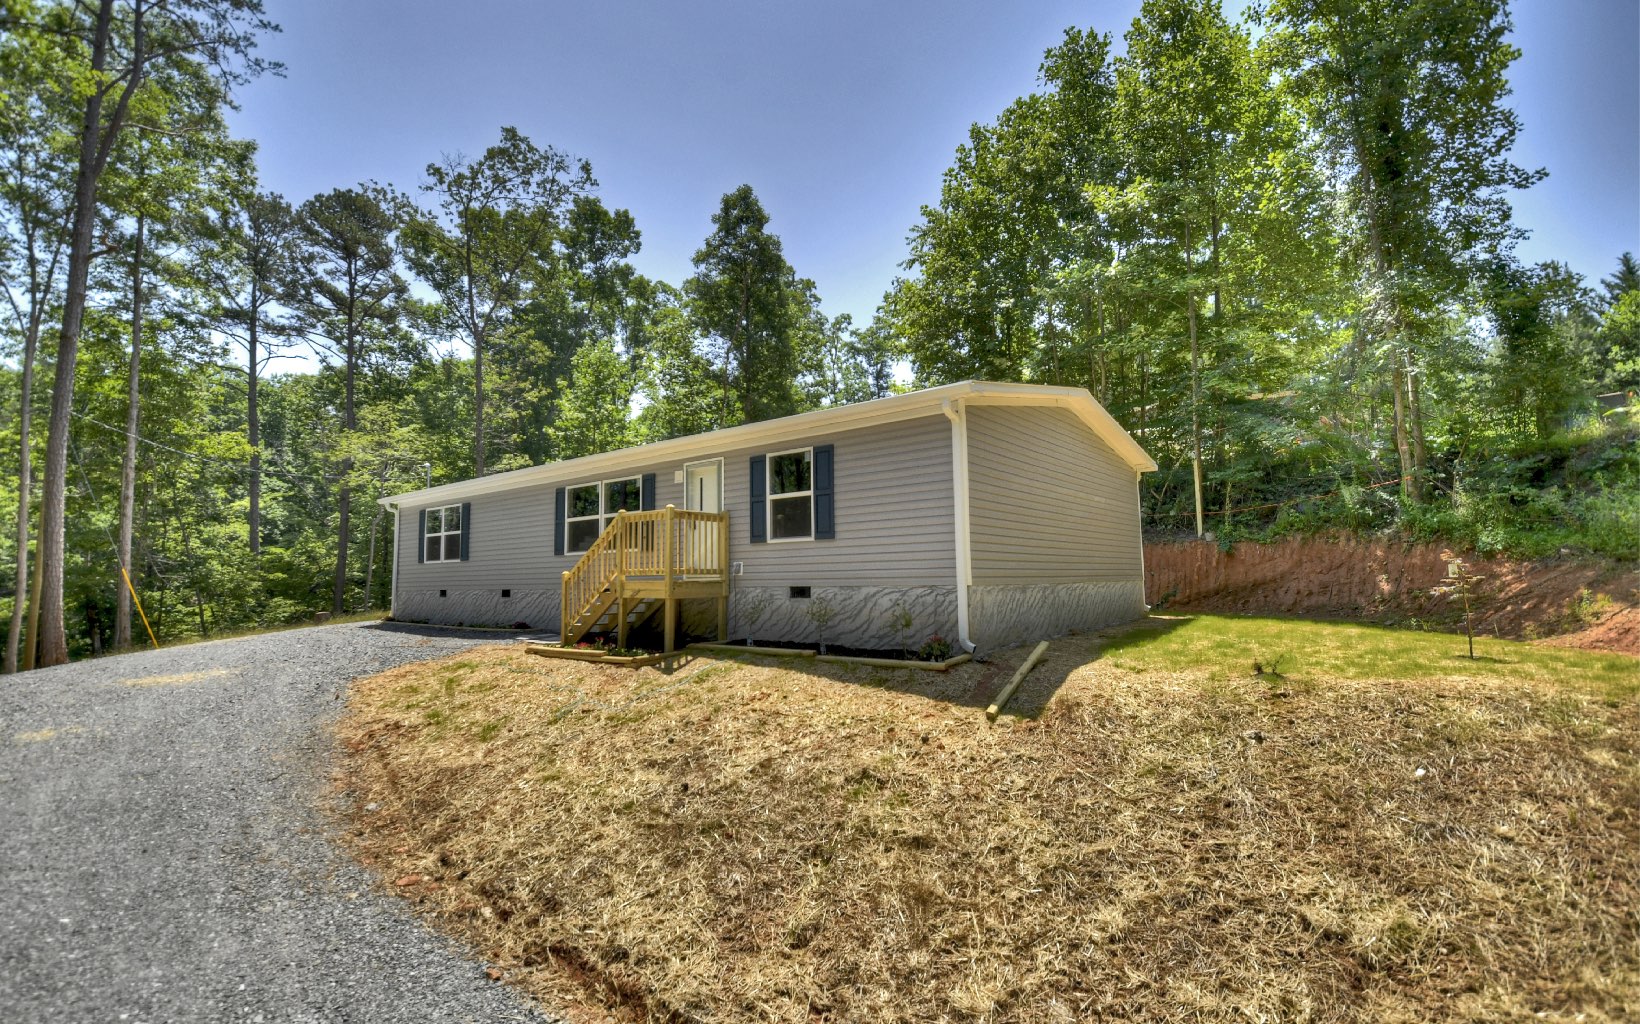 BACK ON THE MARKET^^^Under Construction with Permanent foundation available for FHA & VA Financing!! Are you Renting, now is the time to Buy!! Brand New Manufactured Home Features 3 Bedrooms 2 Full Baths Open Concept Floor Plan!! Just minutes from Hwy 515, Ellijay & Carter's Lake!! On 1.25 Acres County Water available!! HOA fee $250.00!! ^^^Under Construction Photos are representative and are subject to change.